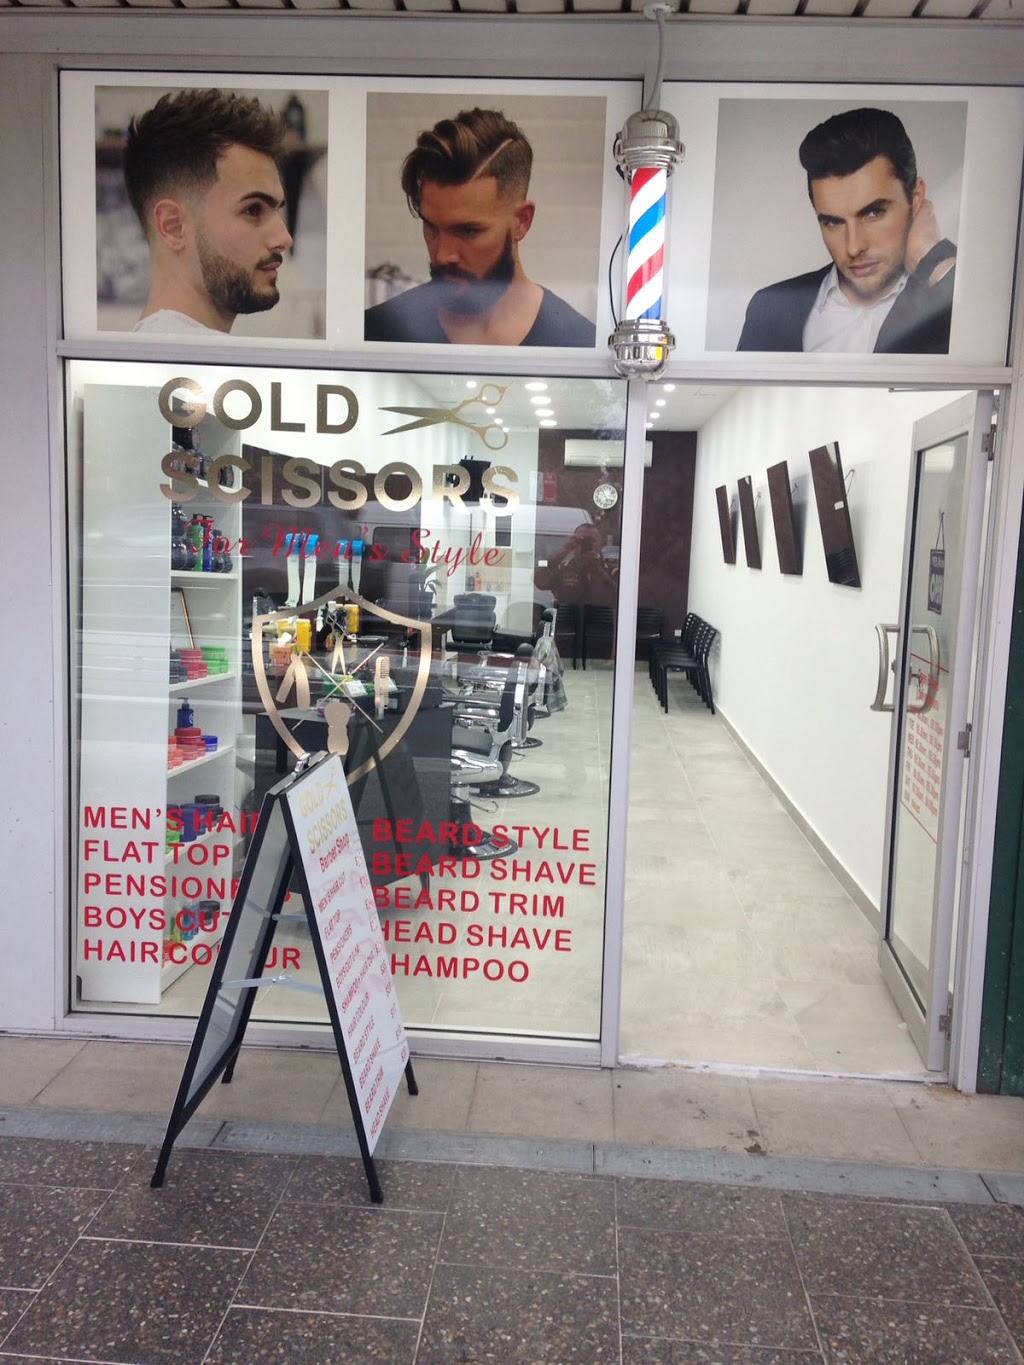 Gold Scissors For Mens Style | 219 Tower St, Panania NSW 2213, Australia | Phone: 0403 298 353